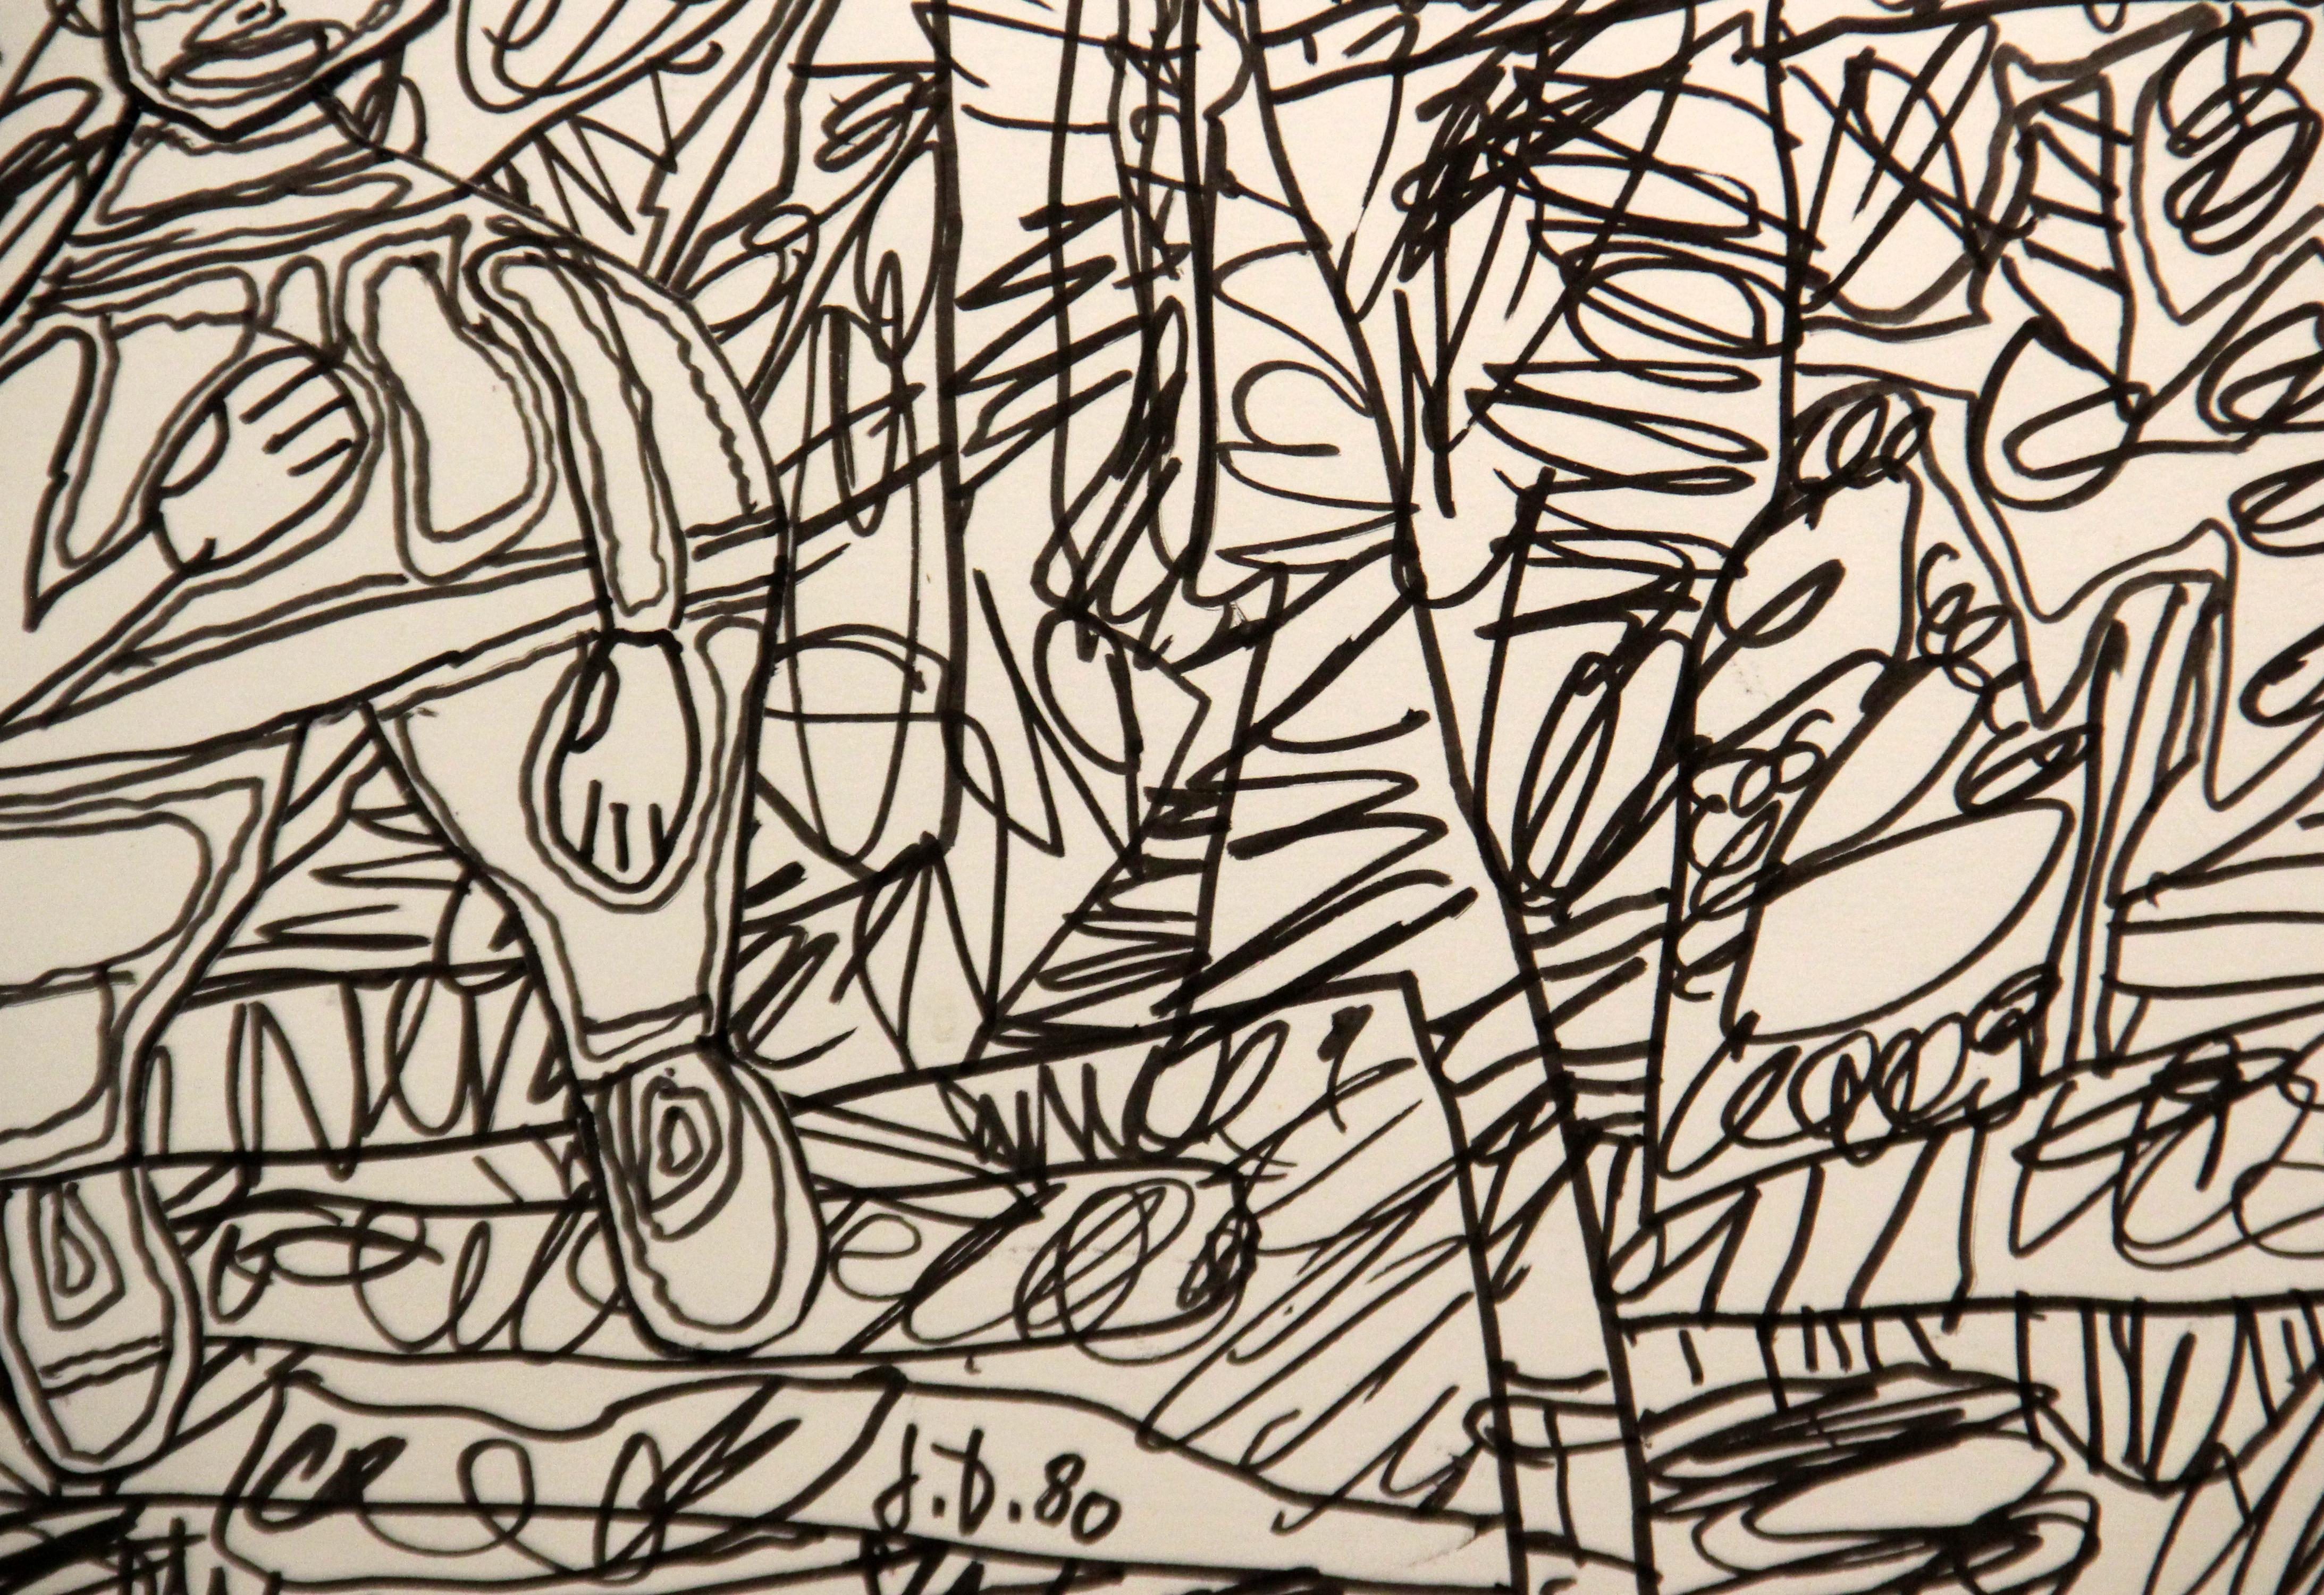 Jean DuBuffet, Site aux Figurines, Black Marker on Paper, Signed and Dated – Art von Jean Dubuffet